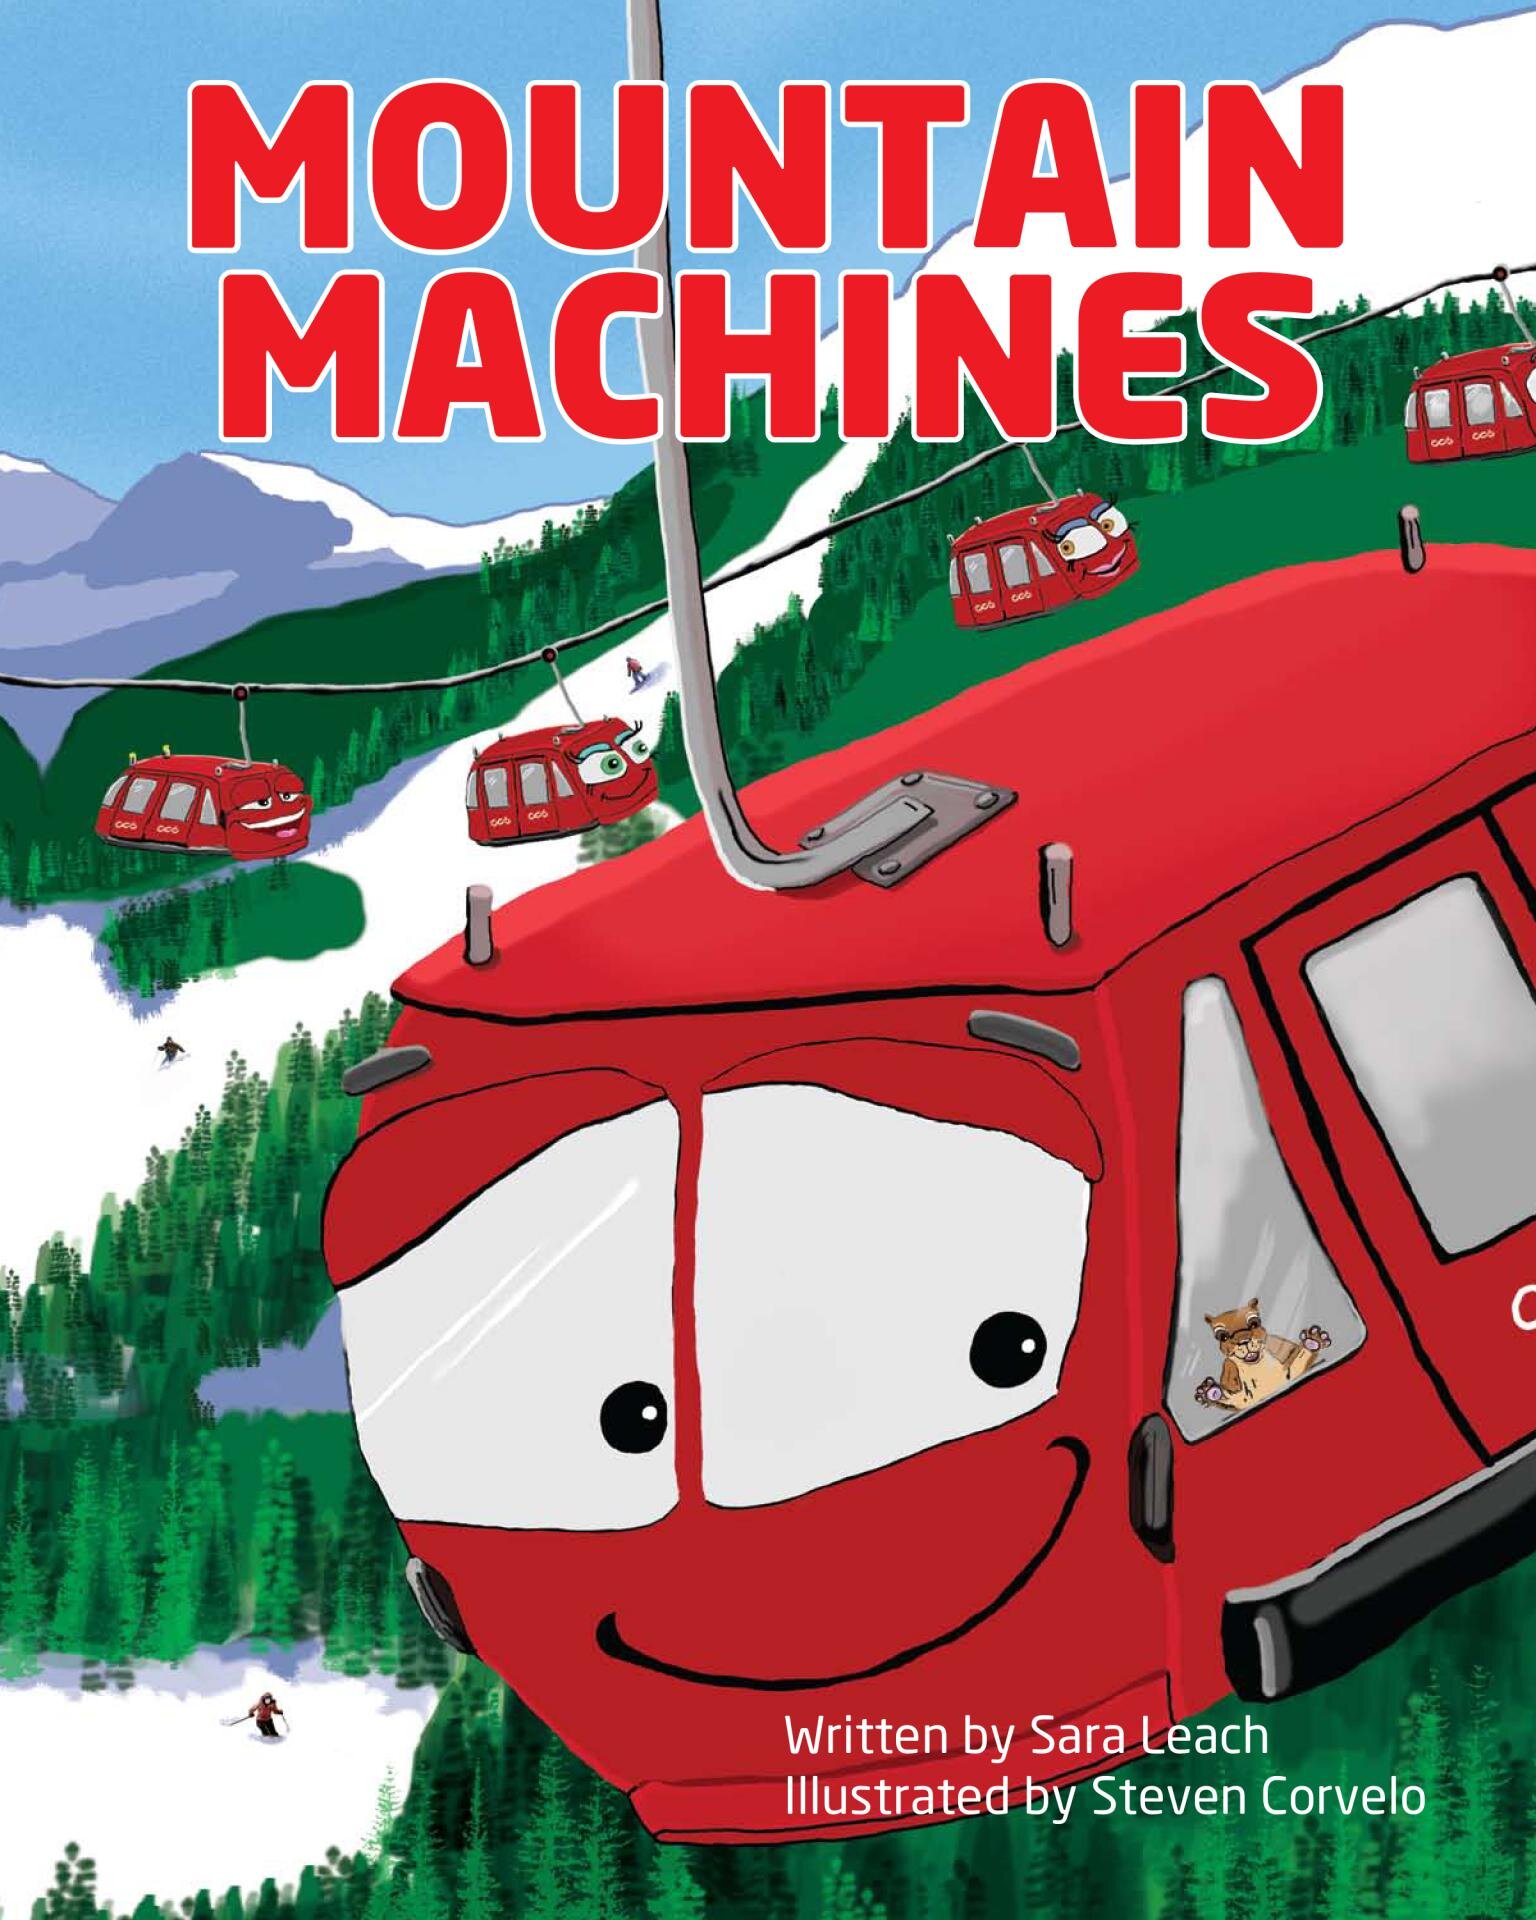 MountainMachines-cover-000001.jpg